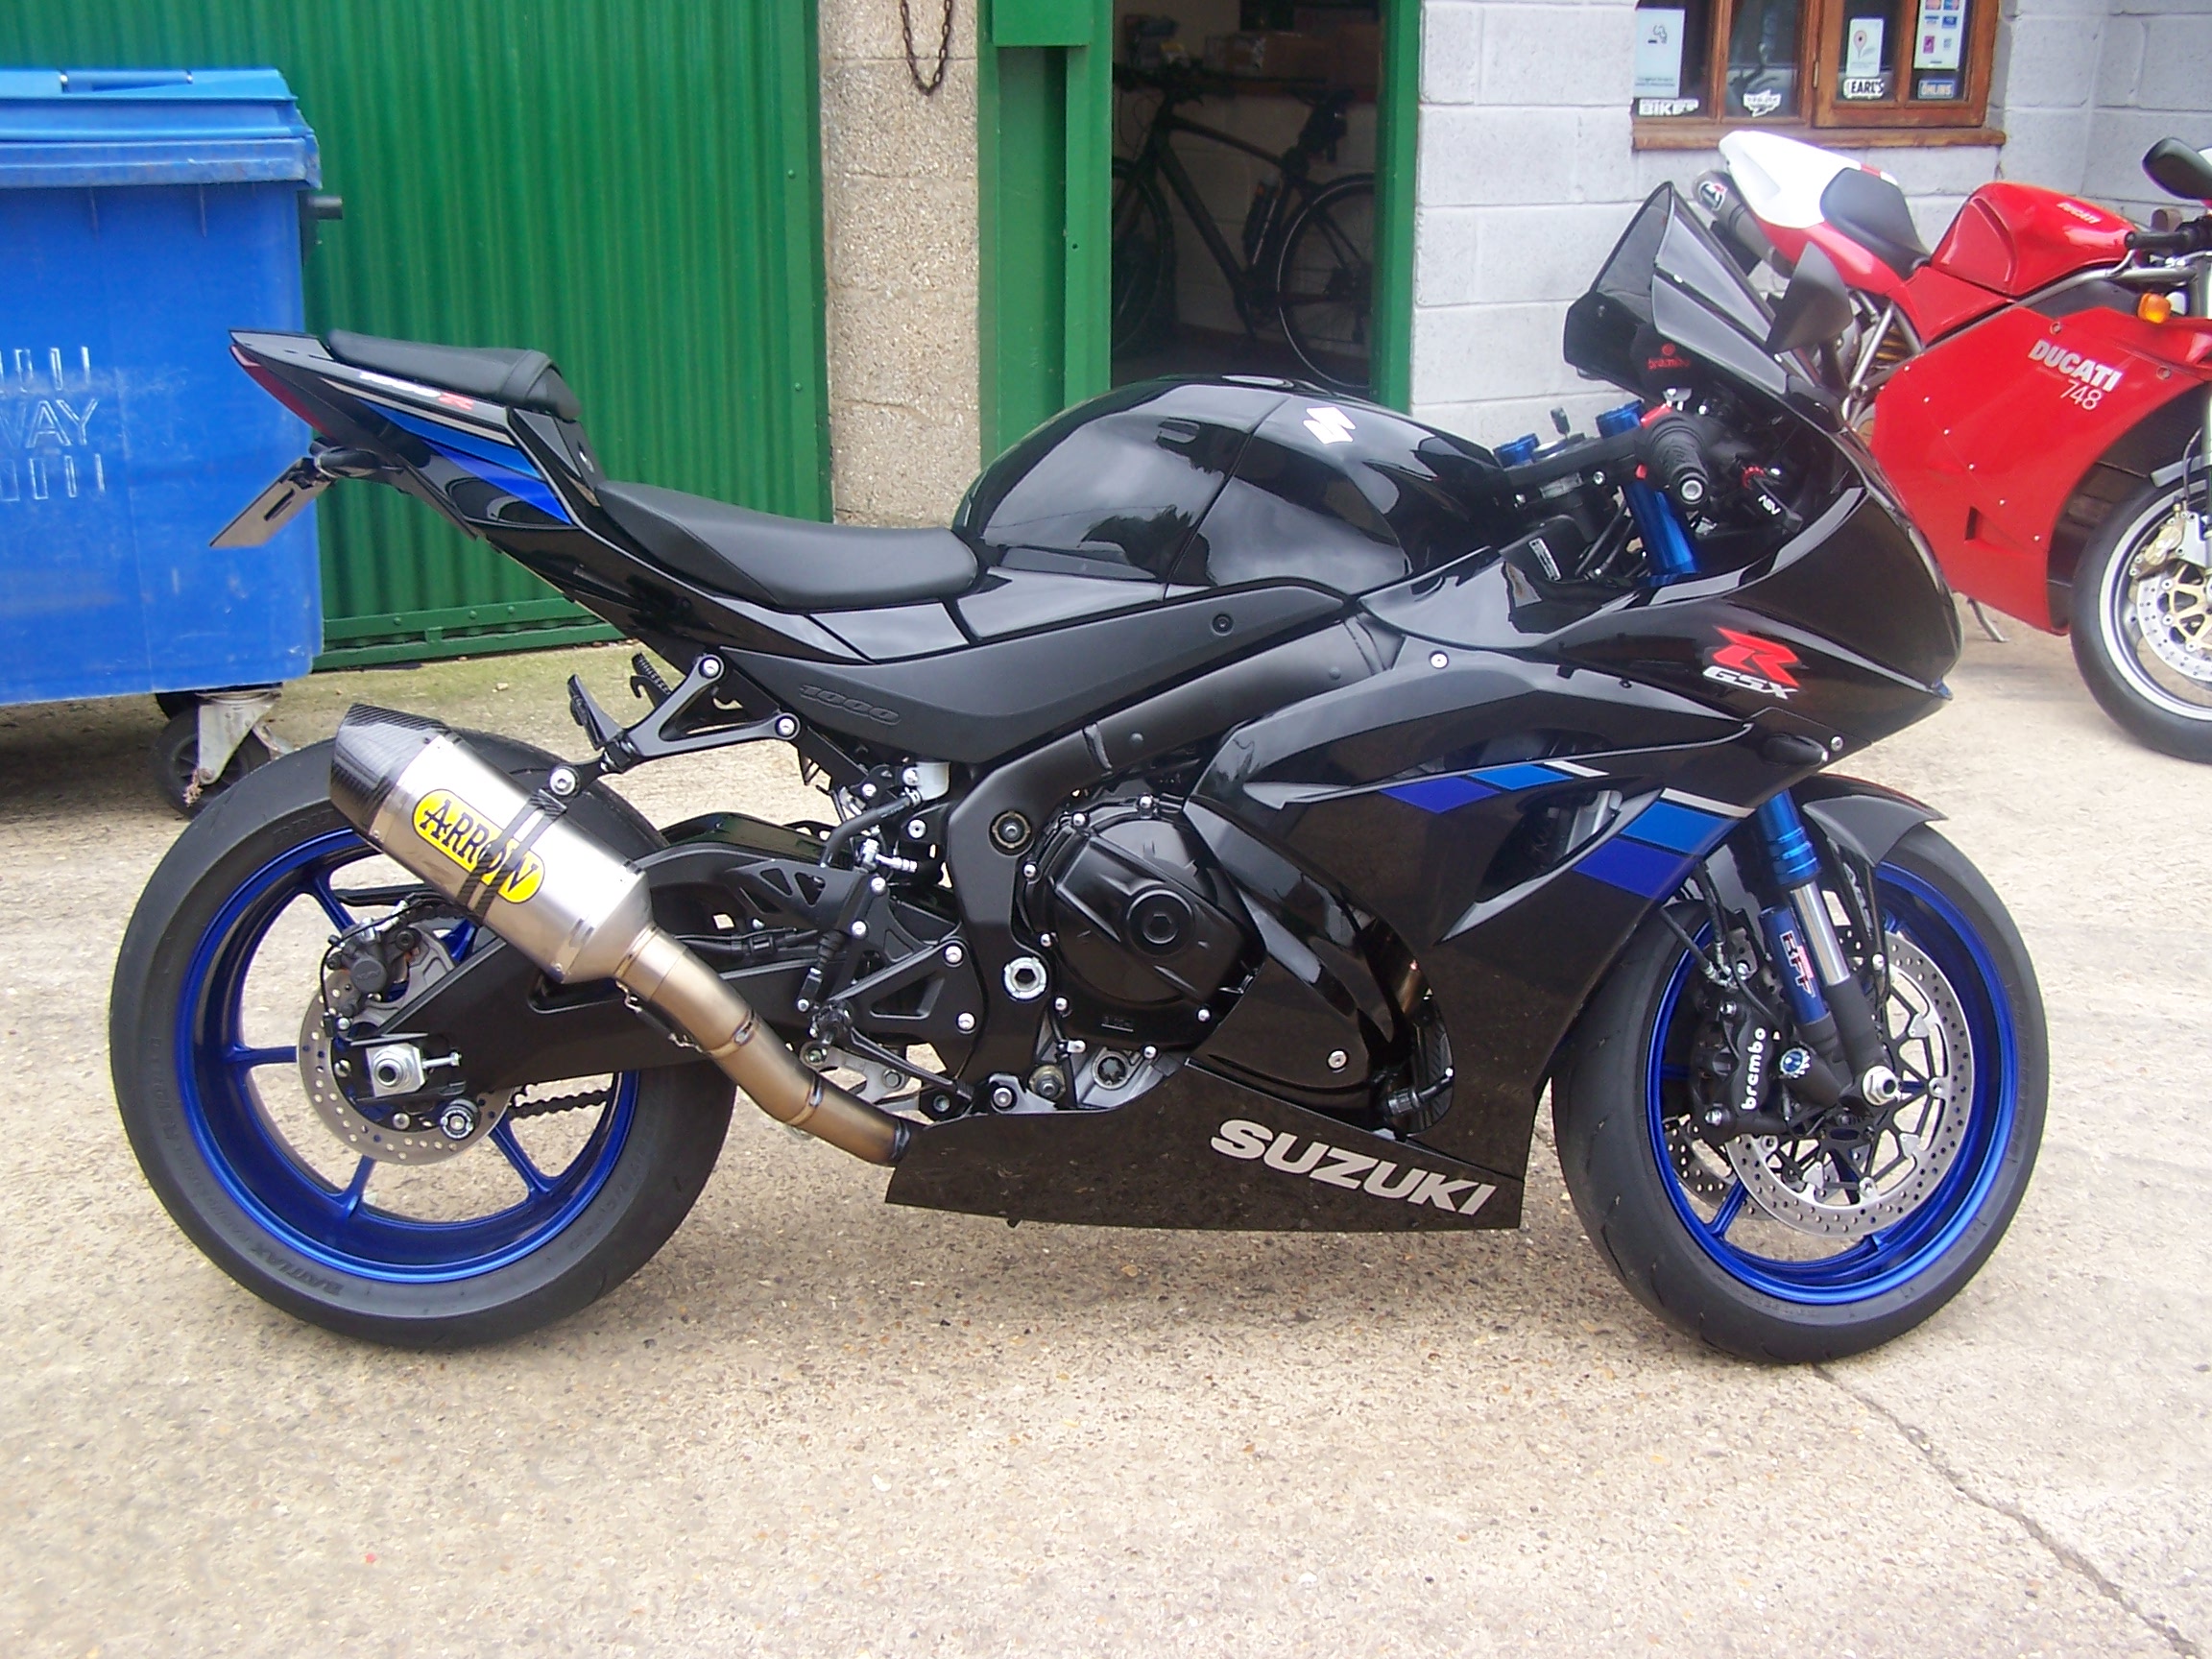 Suzuki GSX-R1000L7 ECU remap after fitment of full Arrow system and BMC filter – 10bhp gain and no loss of bottom or midrange!